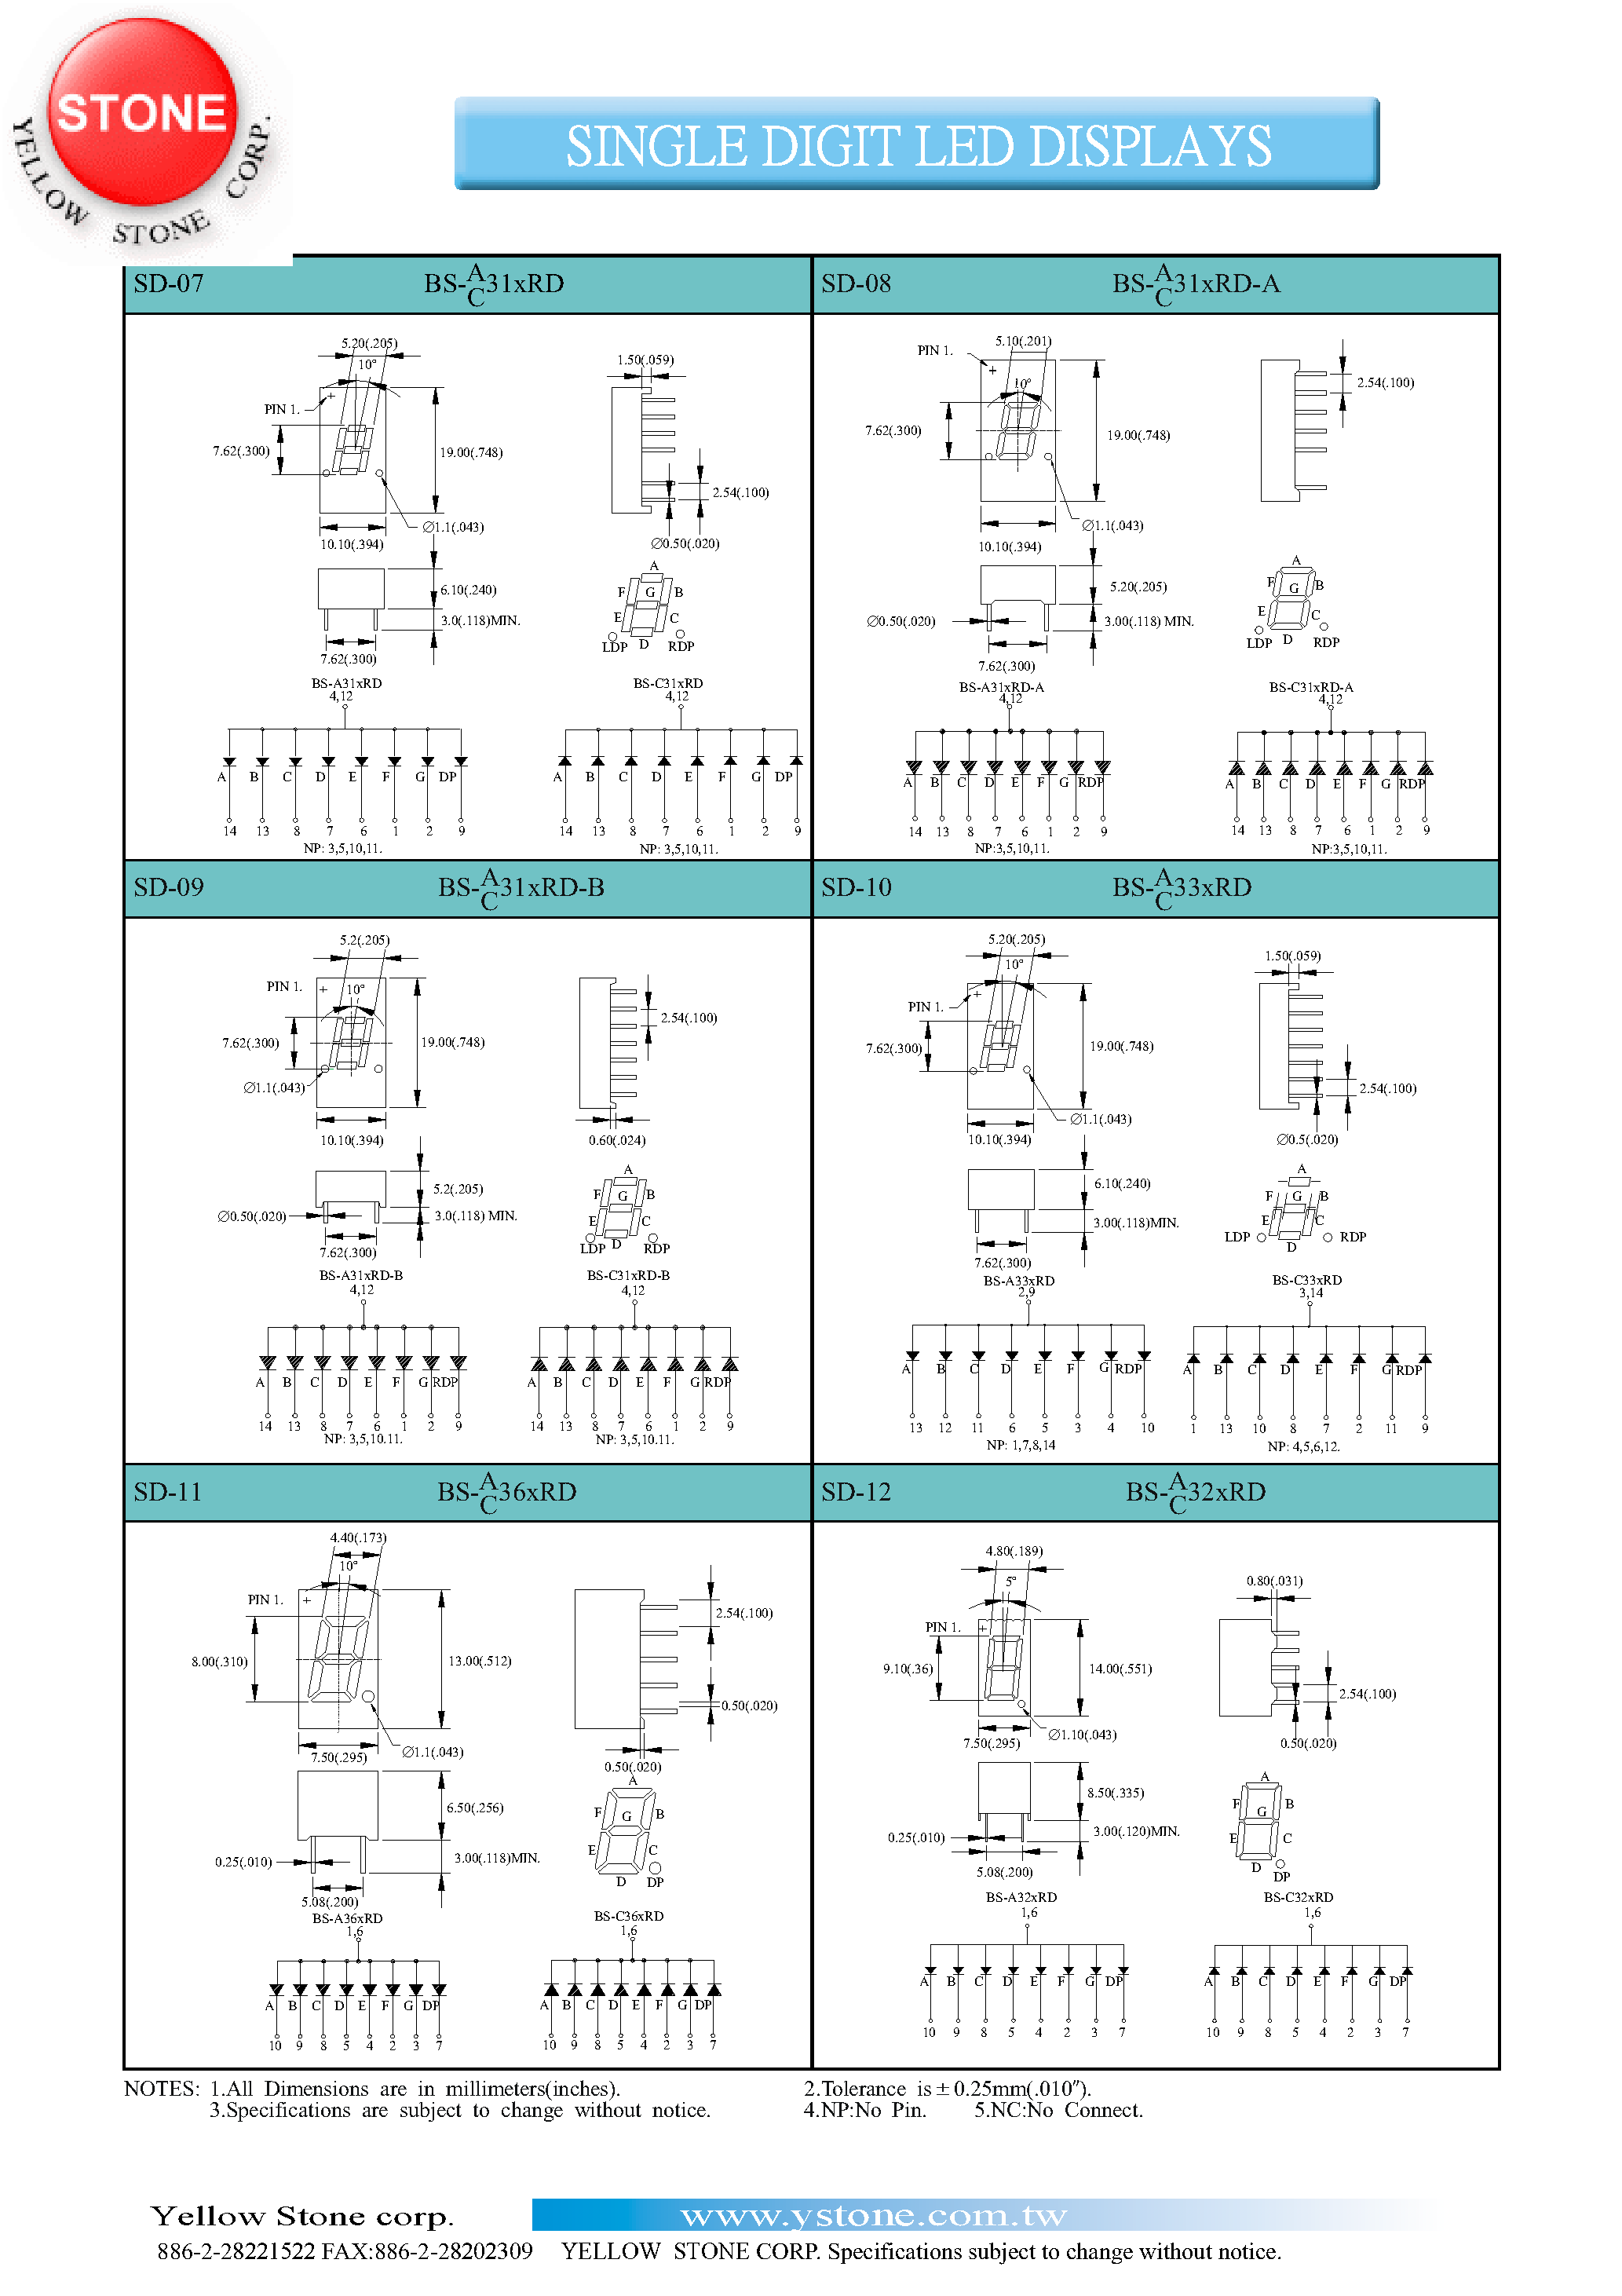 Datasheet BS-A311RD-B - SINGLE DIGIT LED DISPLAYS page 2